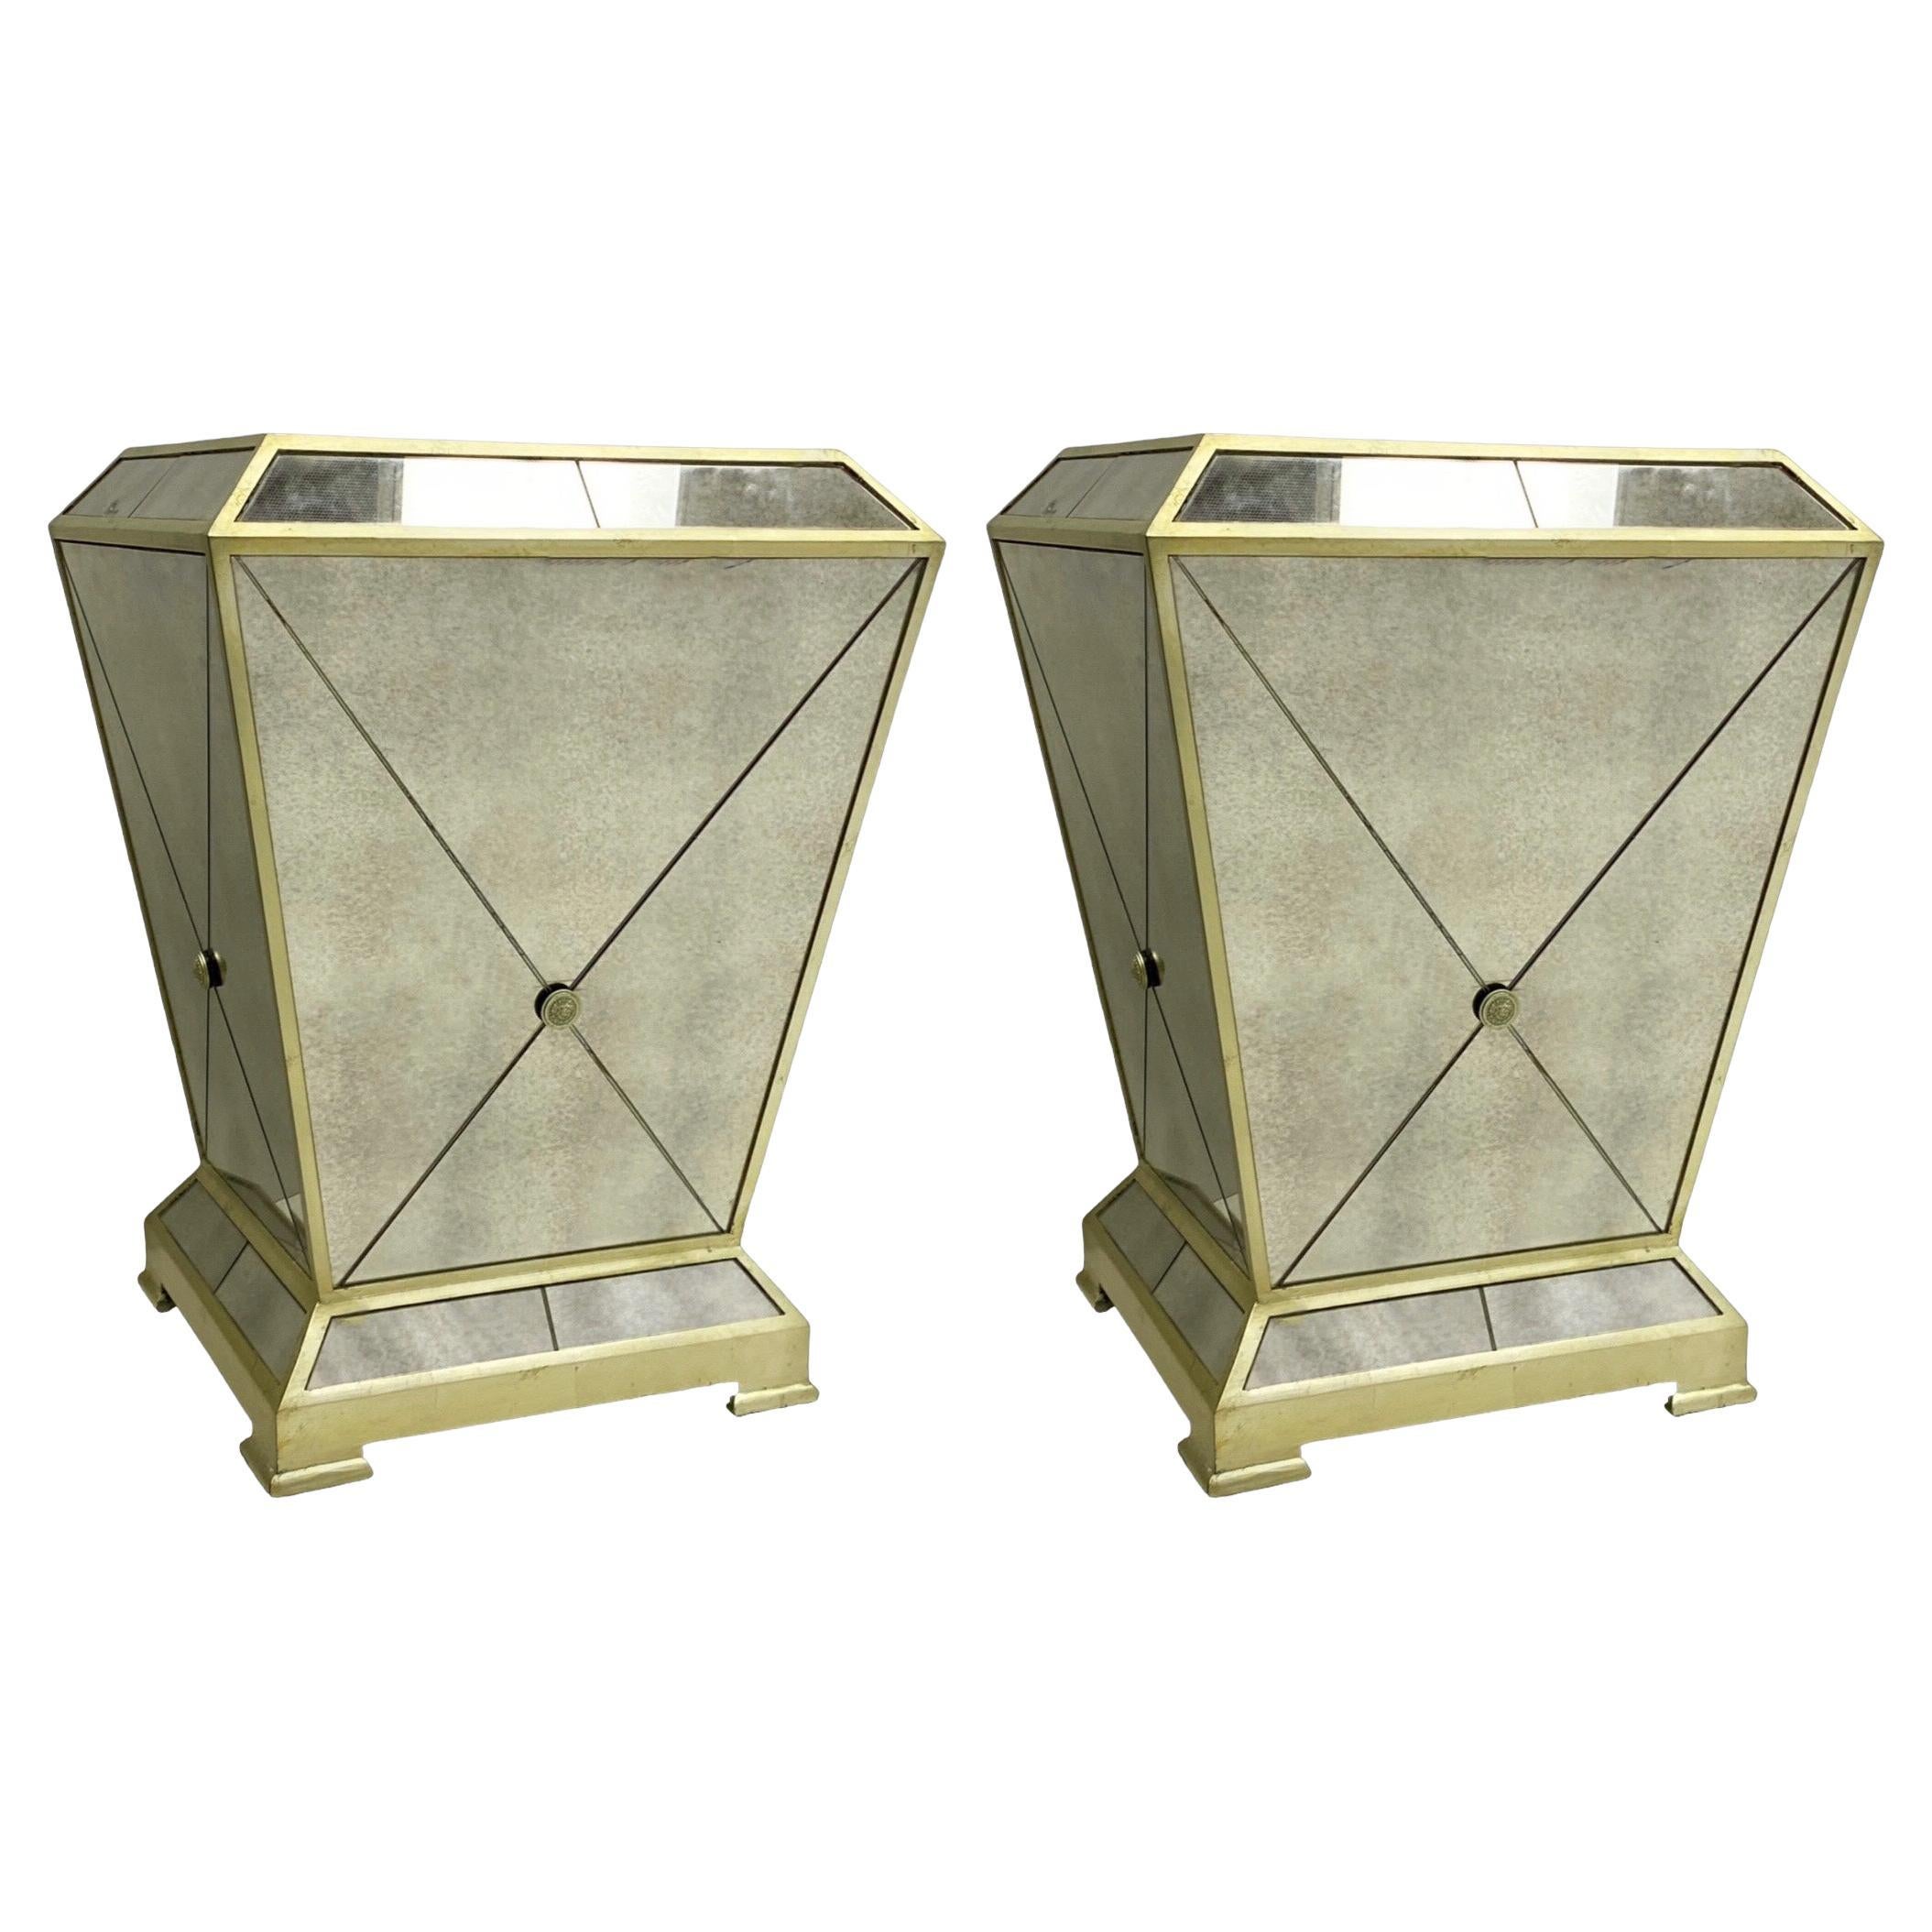 1980s Large Neo-Classical Style Mirror & Brass Pedestals or Side Tables - Pair